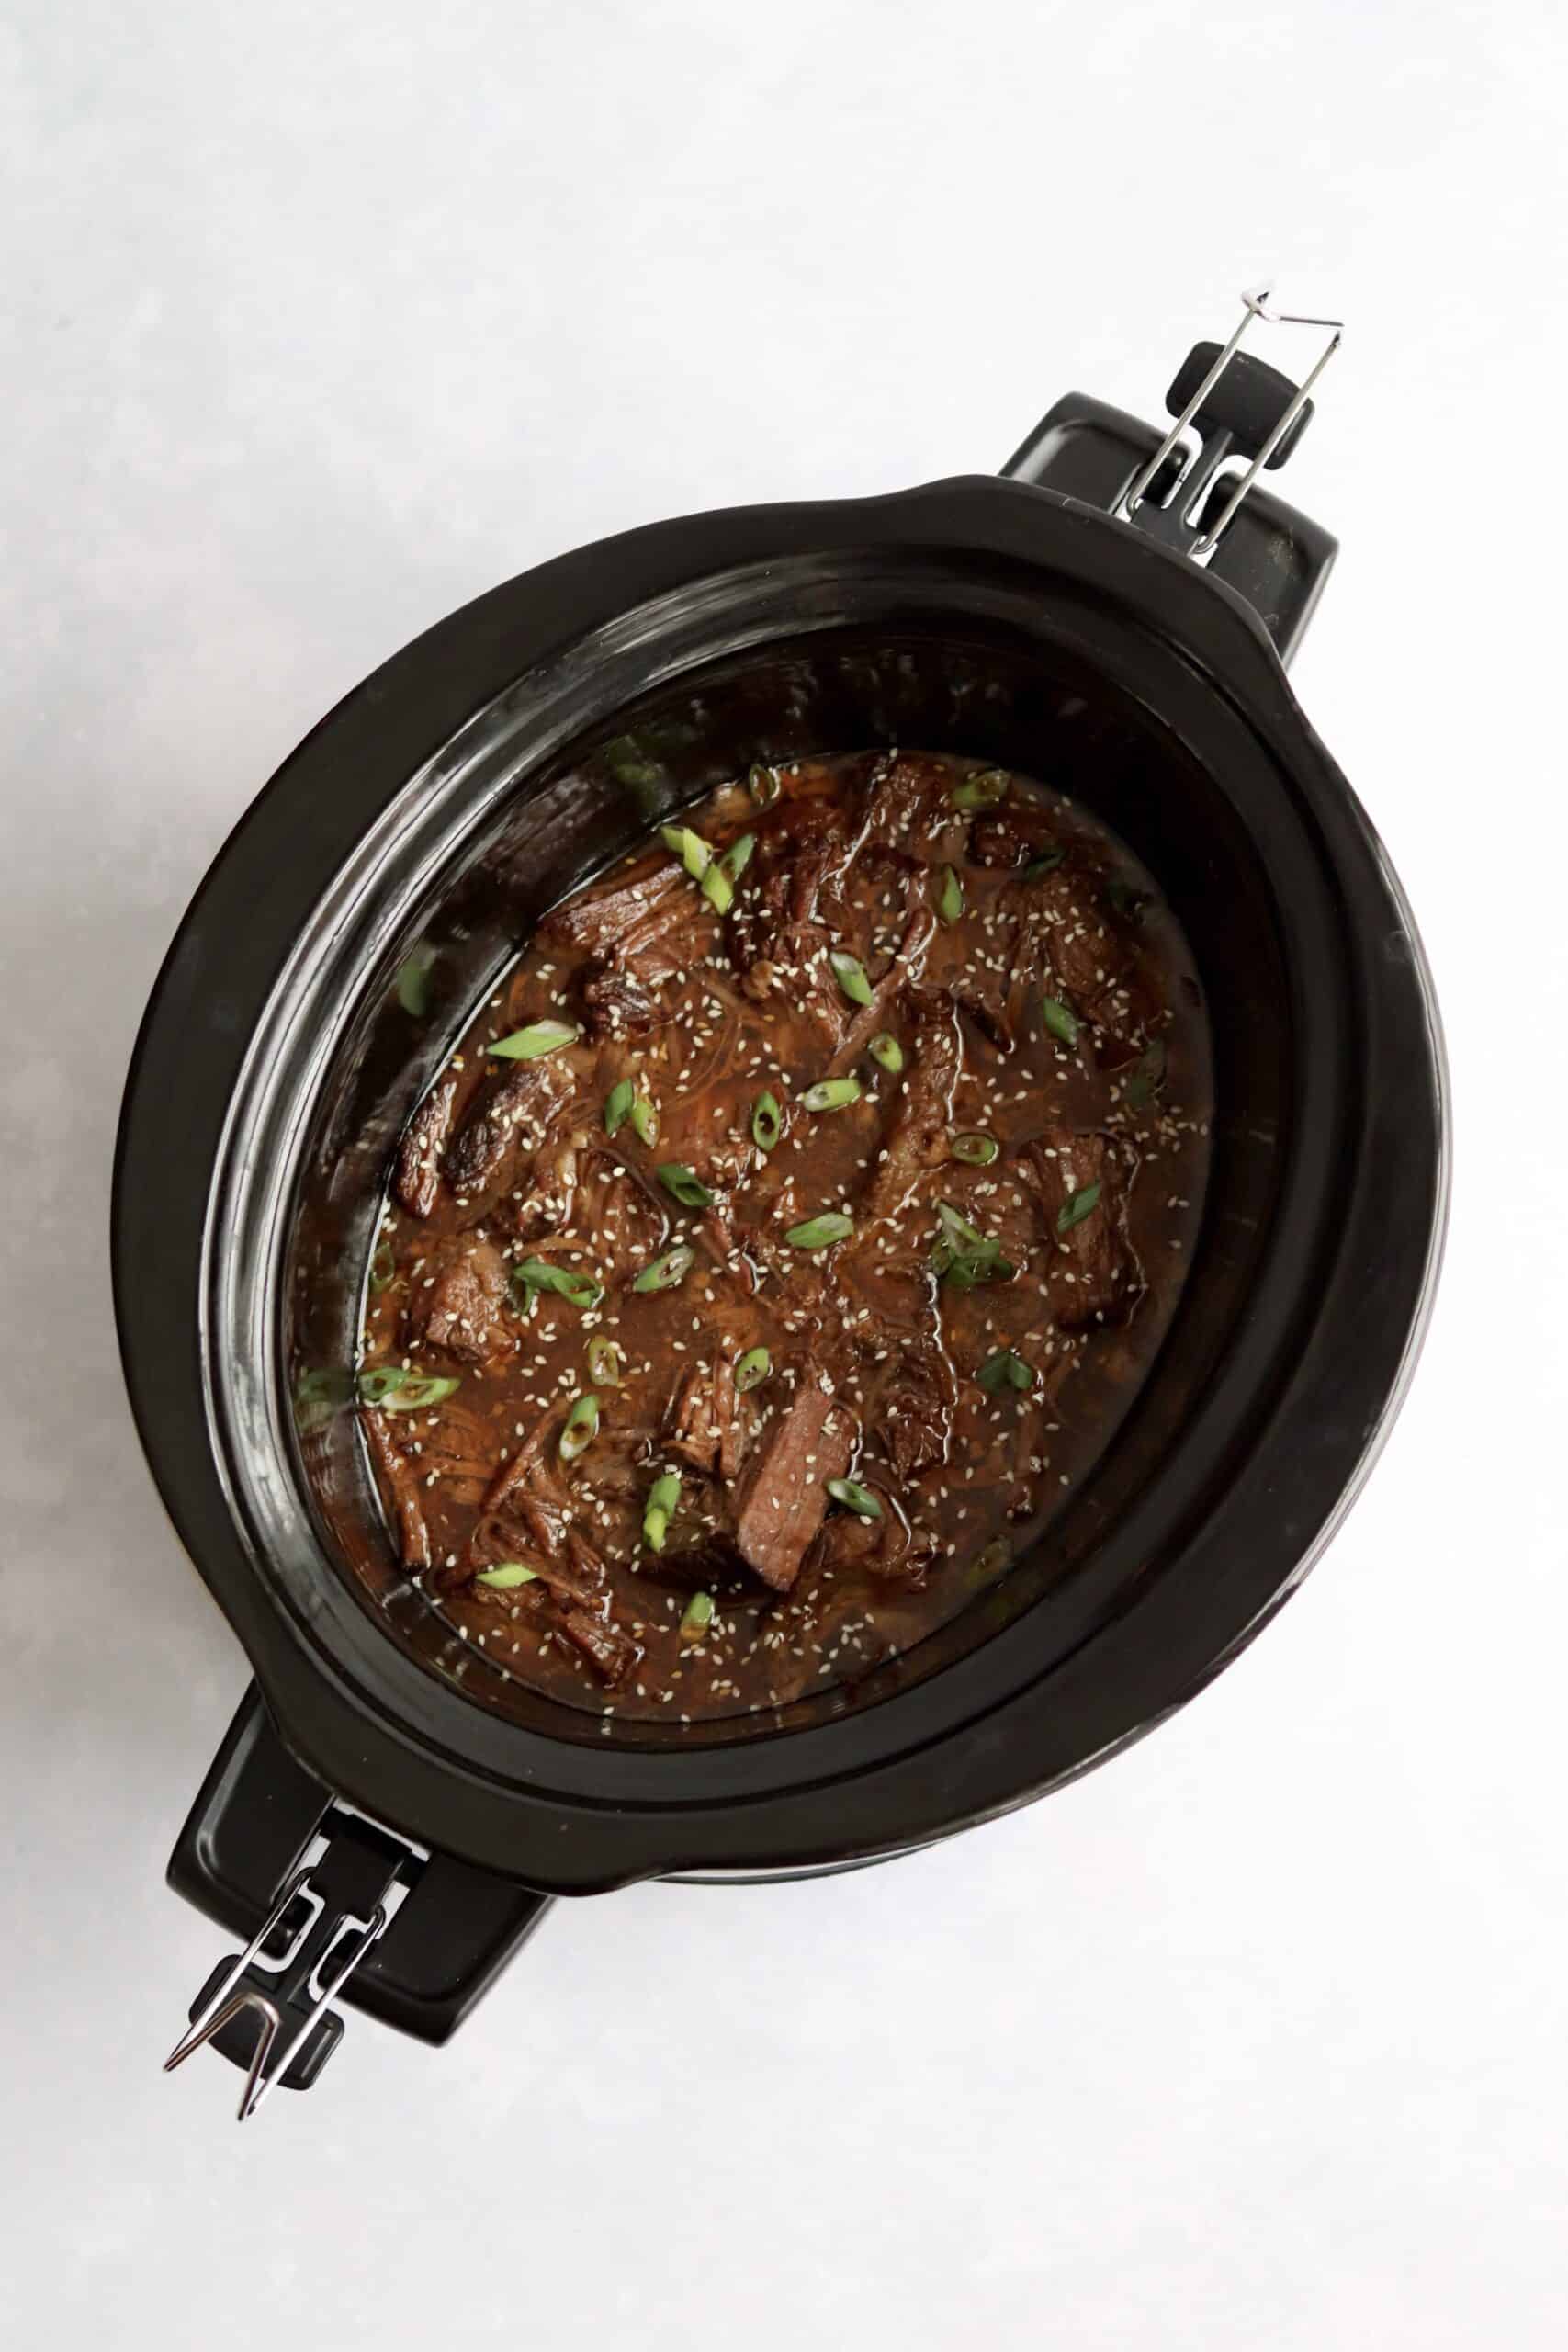 Cooked shredded Korean beef in a slow cooker.